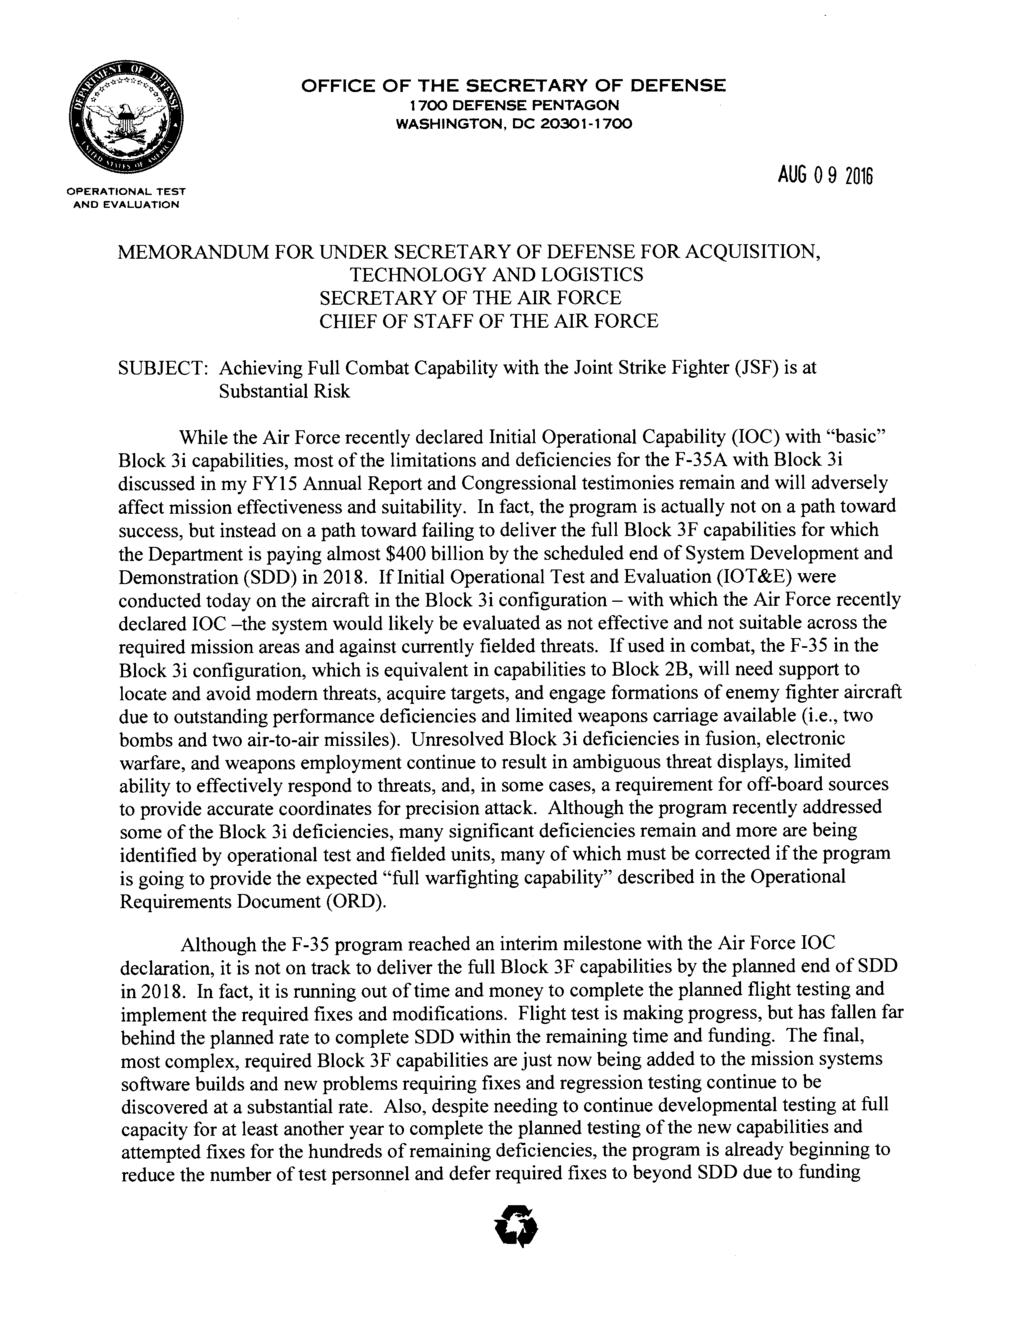 OFFICE OF THE SECRETARY OF DEFENSE 1700 DEFENSE PENTAGON WASHINGTON, DC 20301-1700 OPERATIONAL TEST AND EVALUATION AUG 0 9 2016 MEMORANDUM FOR UNDER SECRETARY OF DEFENSE FOR ACQUISITION, TECHNOLOGY